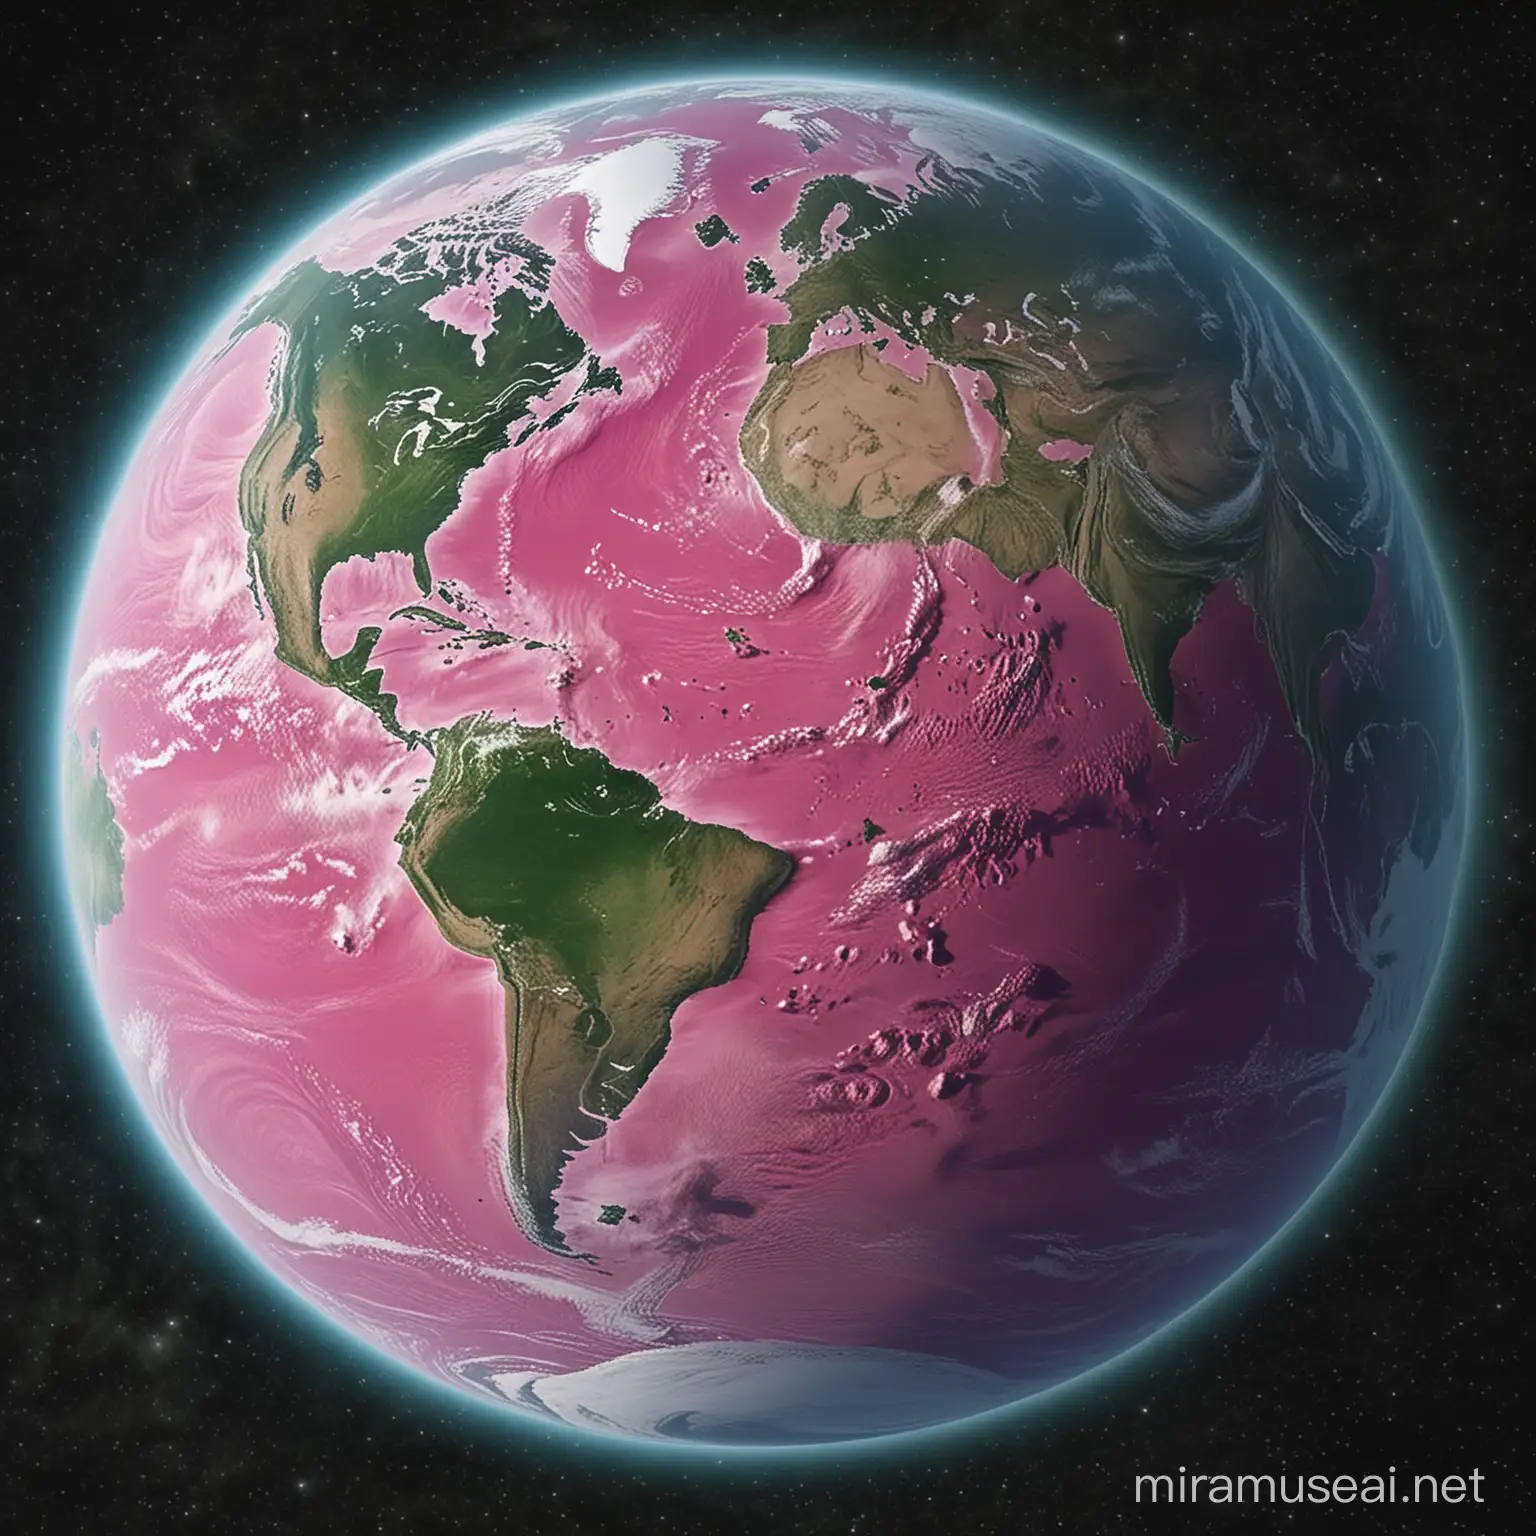 Vibrant Pink and Green Planet Earth in Cosmic Harmony